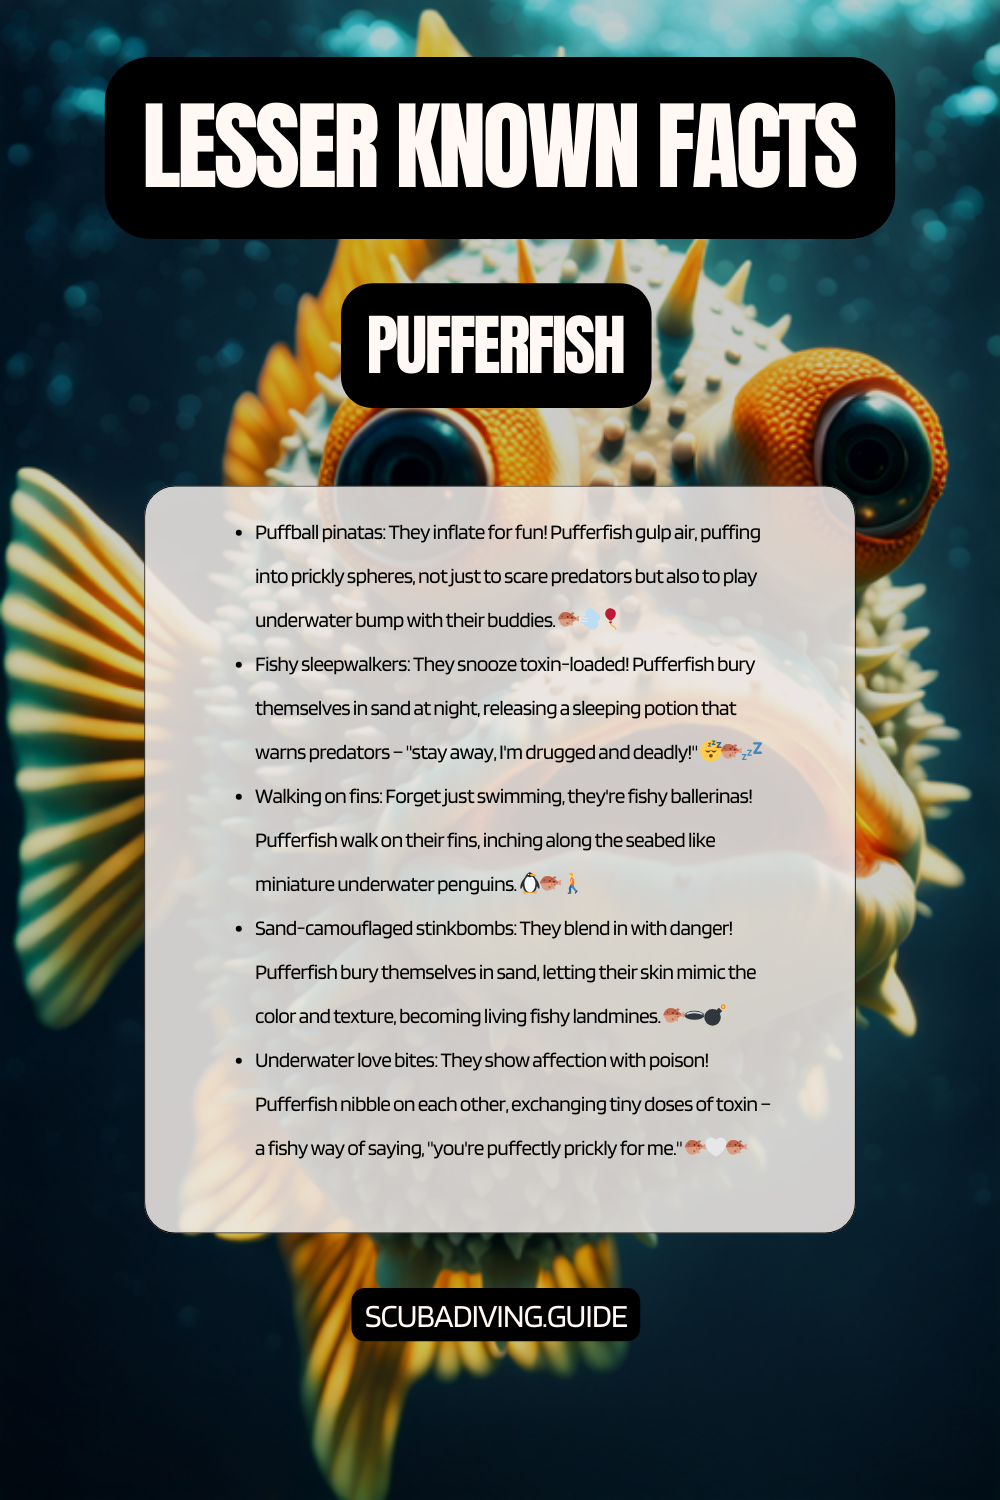 lesser known facts Pufferfish